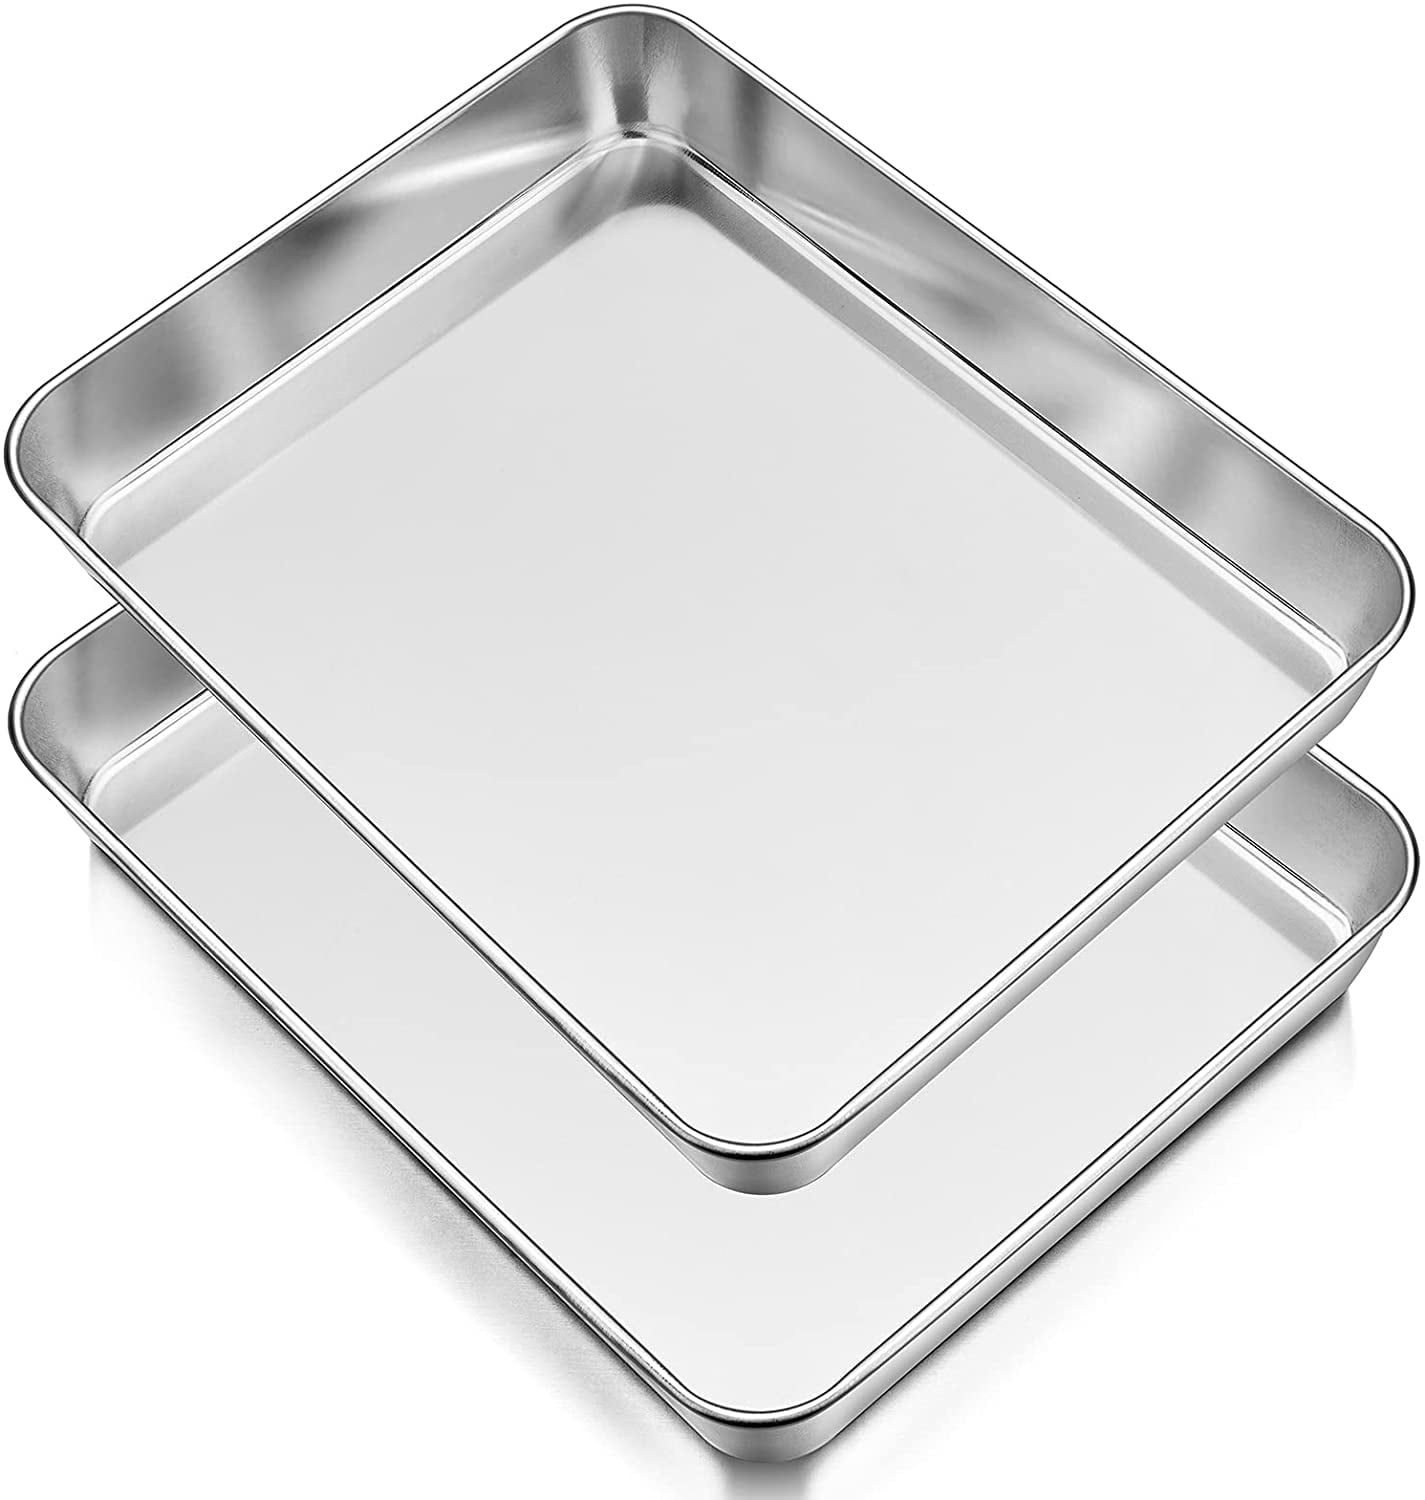 Set of 2 Small Stainless Steel Baking Sheet Pan for Cookie,Non Toxic&Healthy 